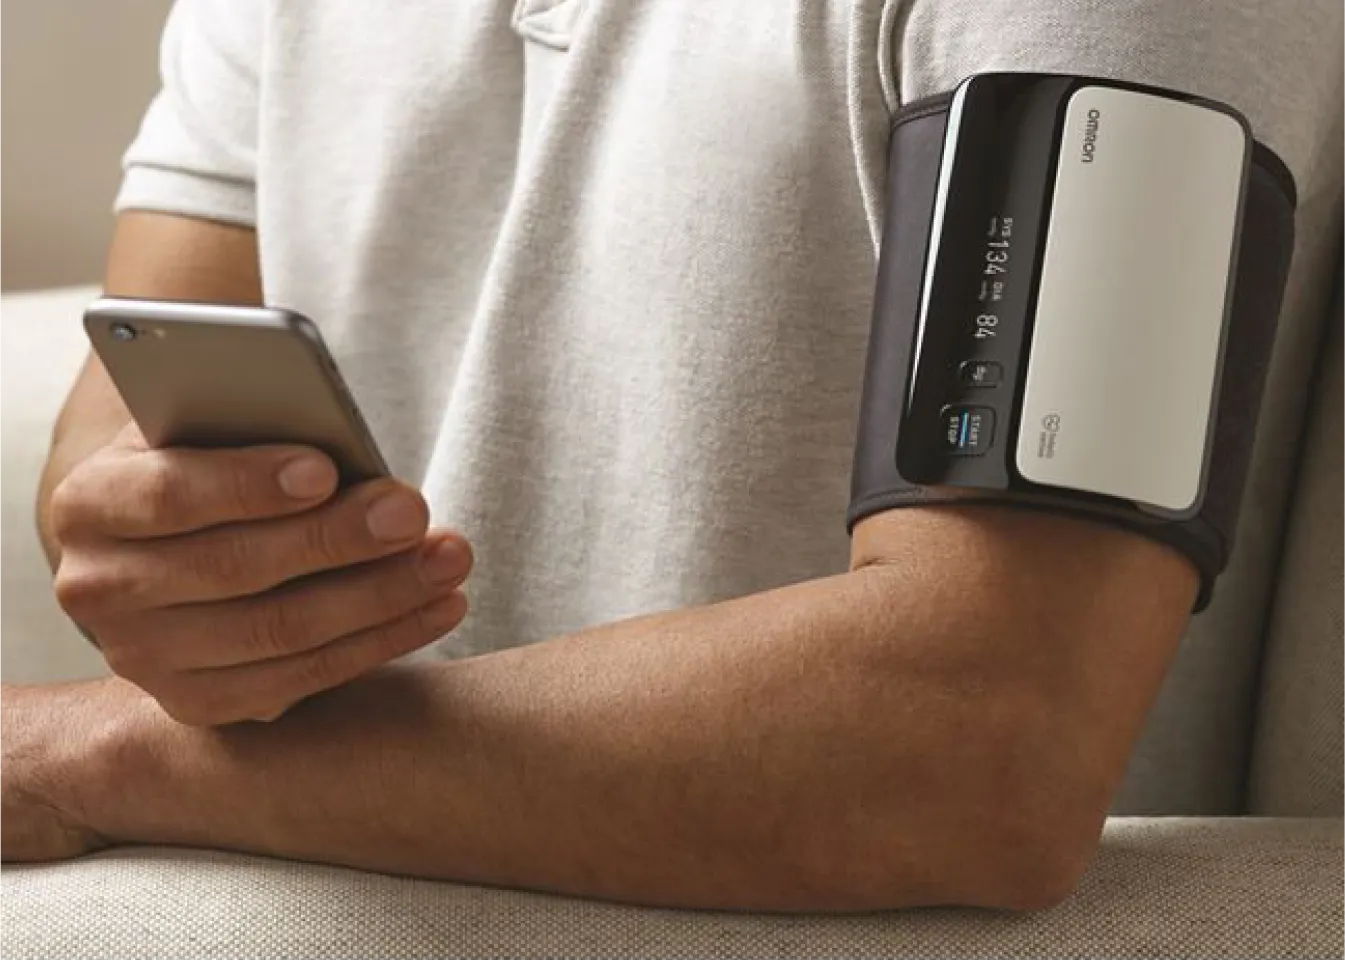 A blood pressure cuff is on one arm while the other hand holds a phone.